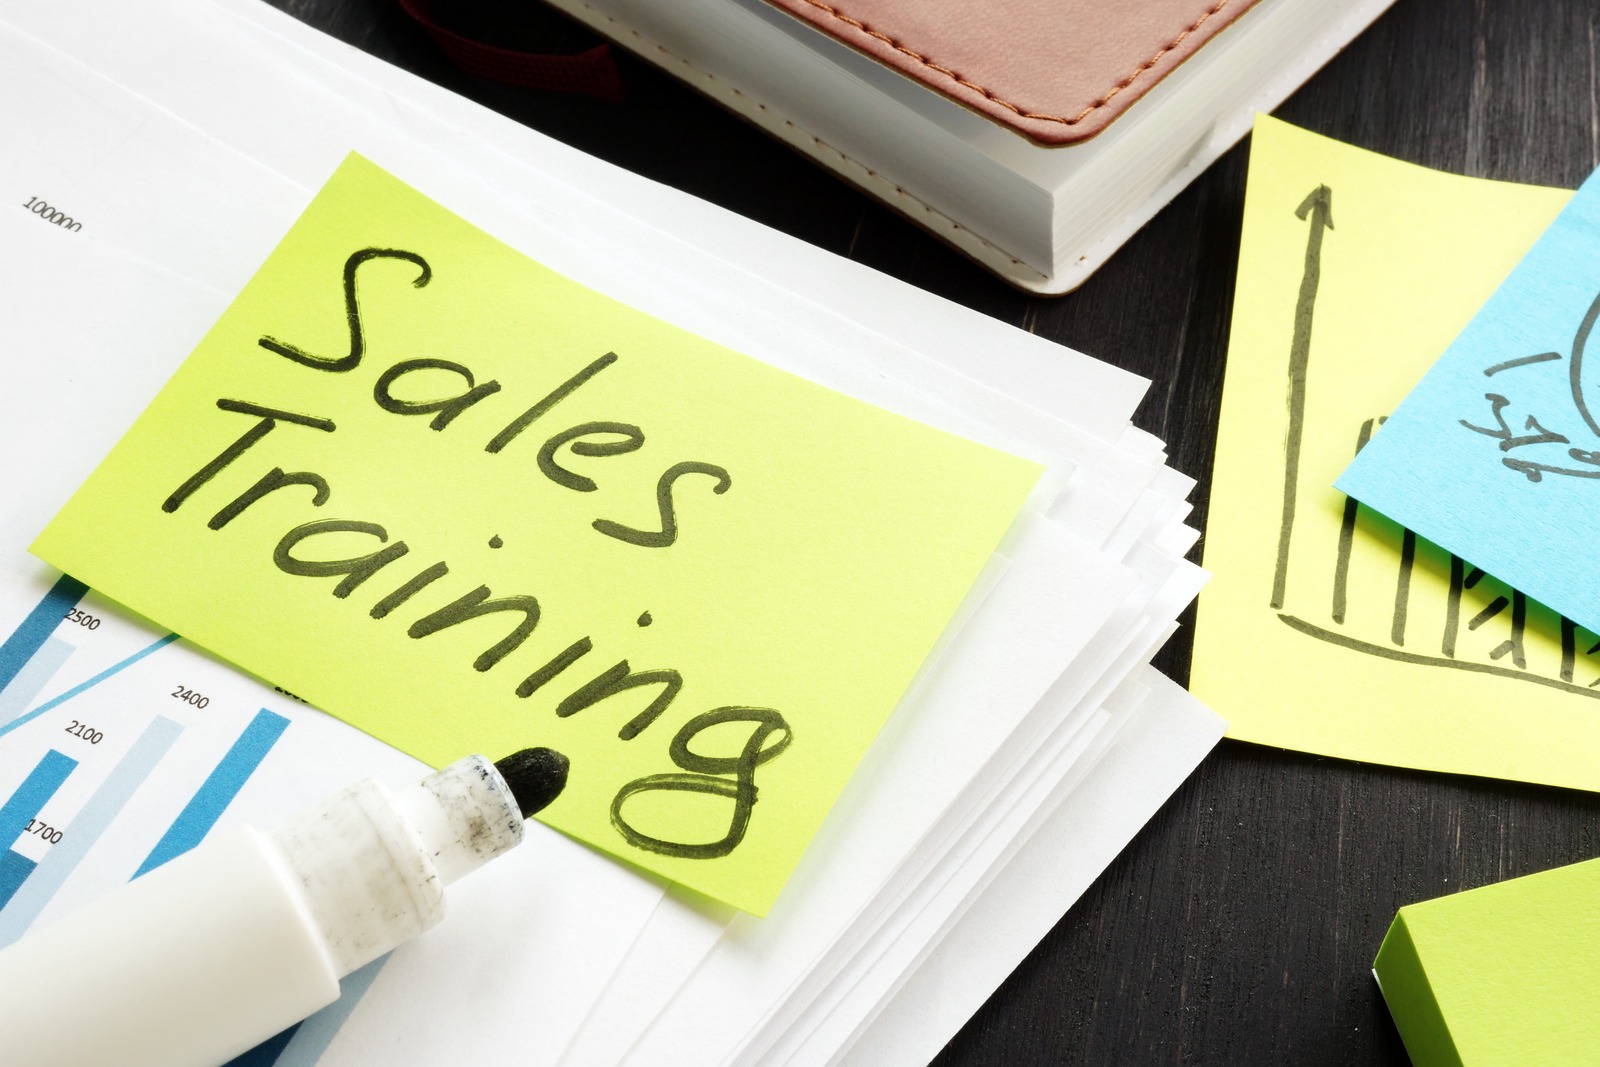 sales training research paper